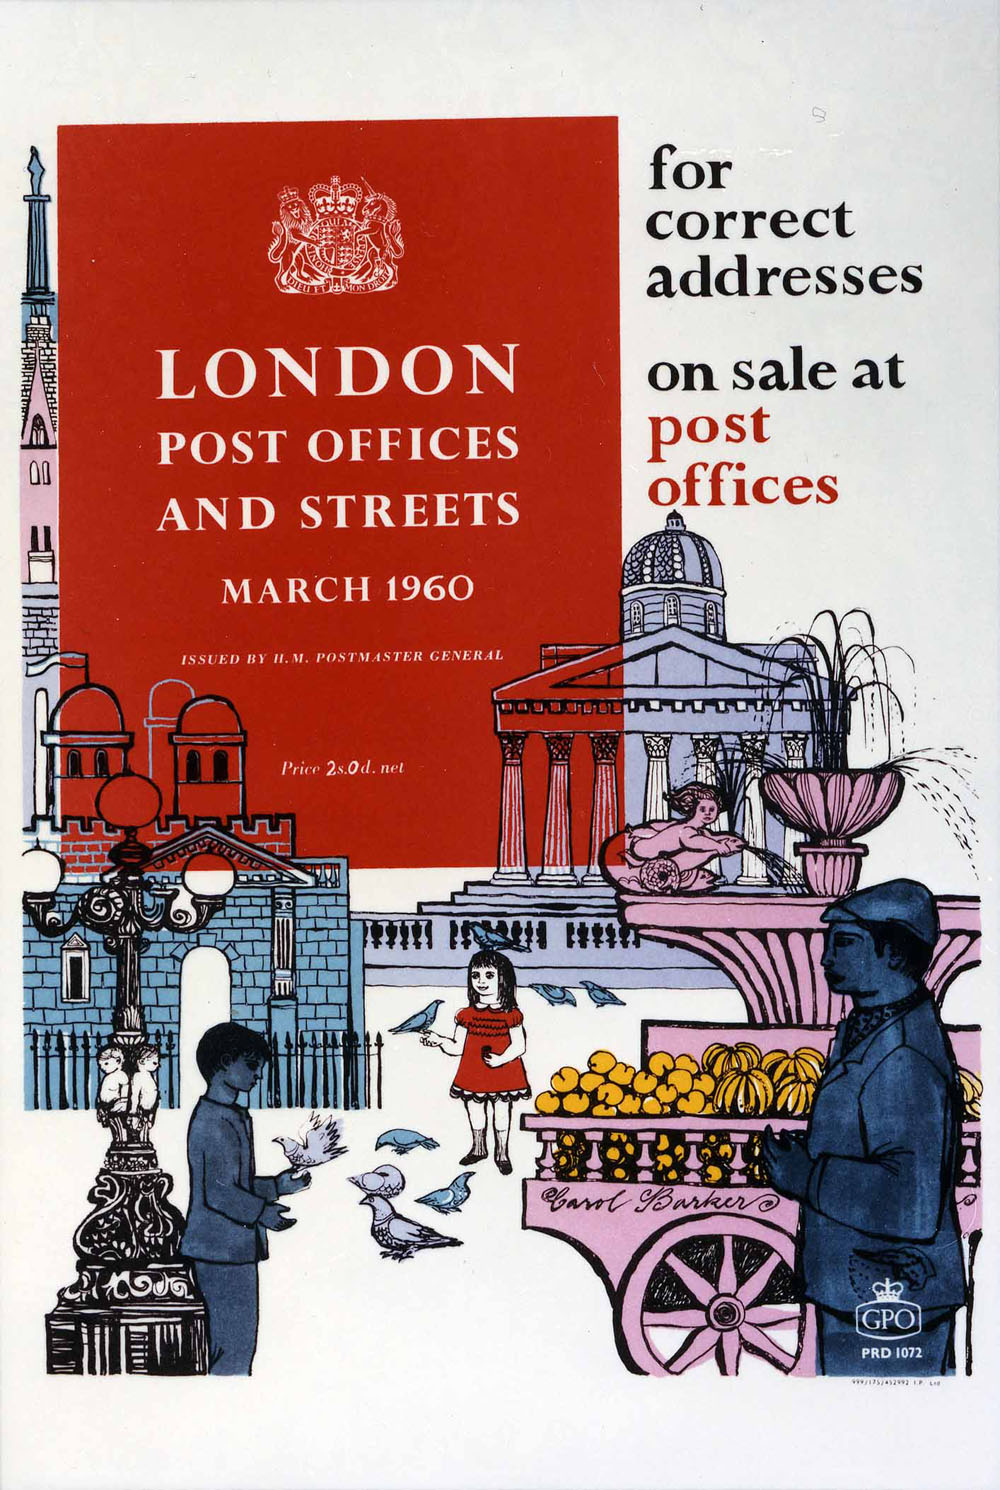 'London Post Offices and Streets March 1960. For correct addresses'. Poster designed by Carol Barker, PRD 1072, 1960, POST 110/1393. 